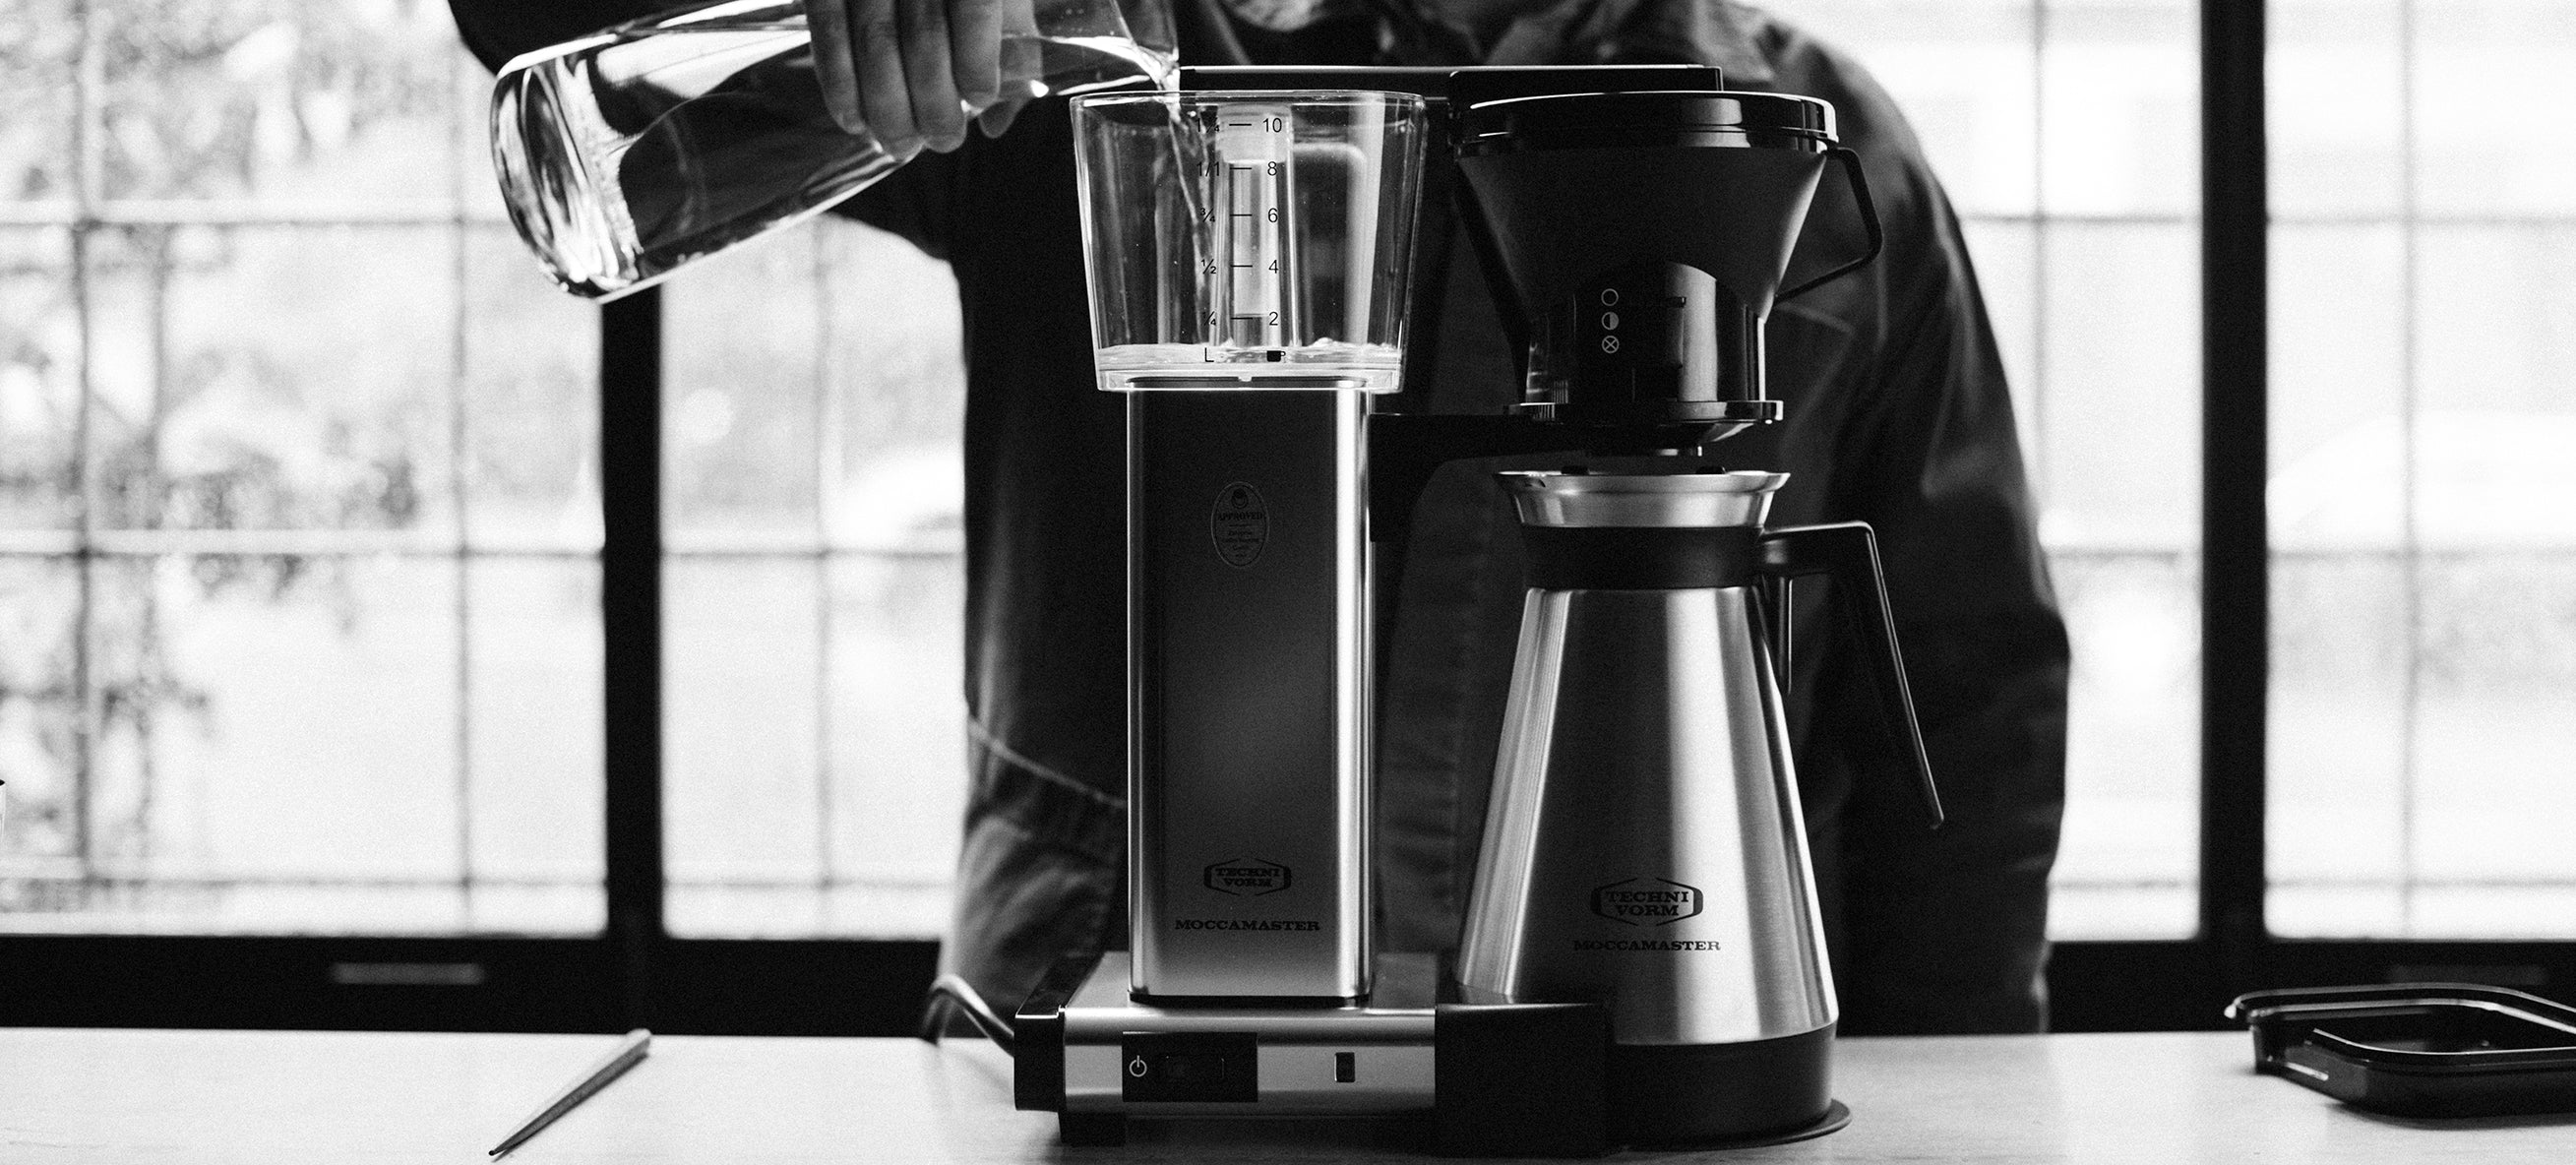 Making coffee with the Moccamaster KBT